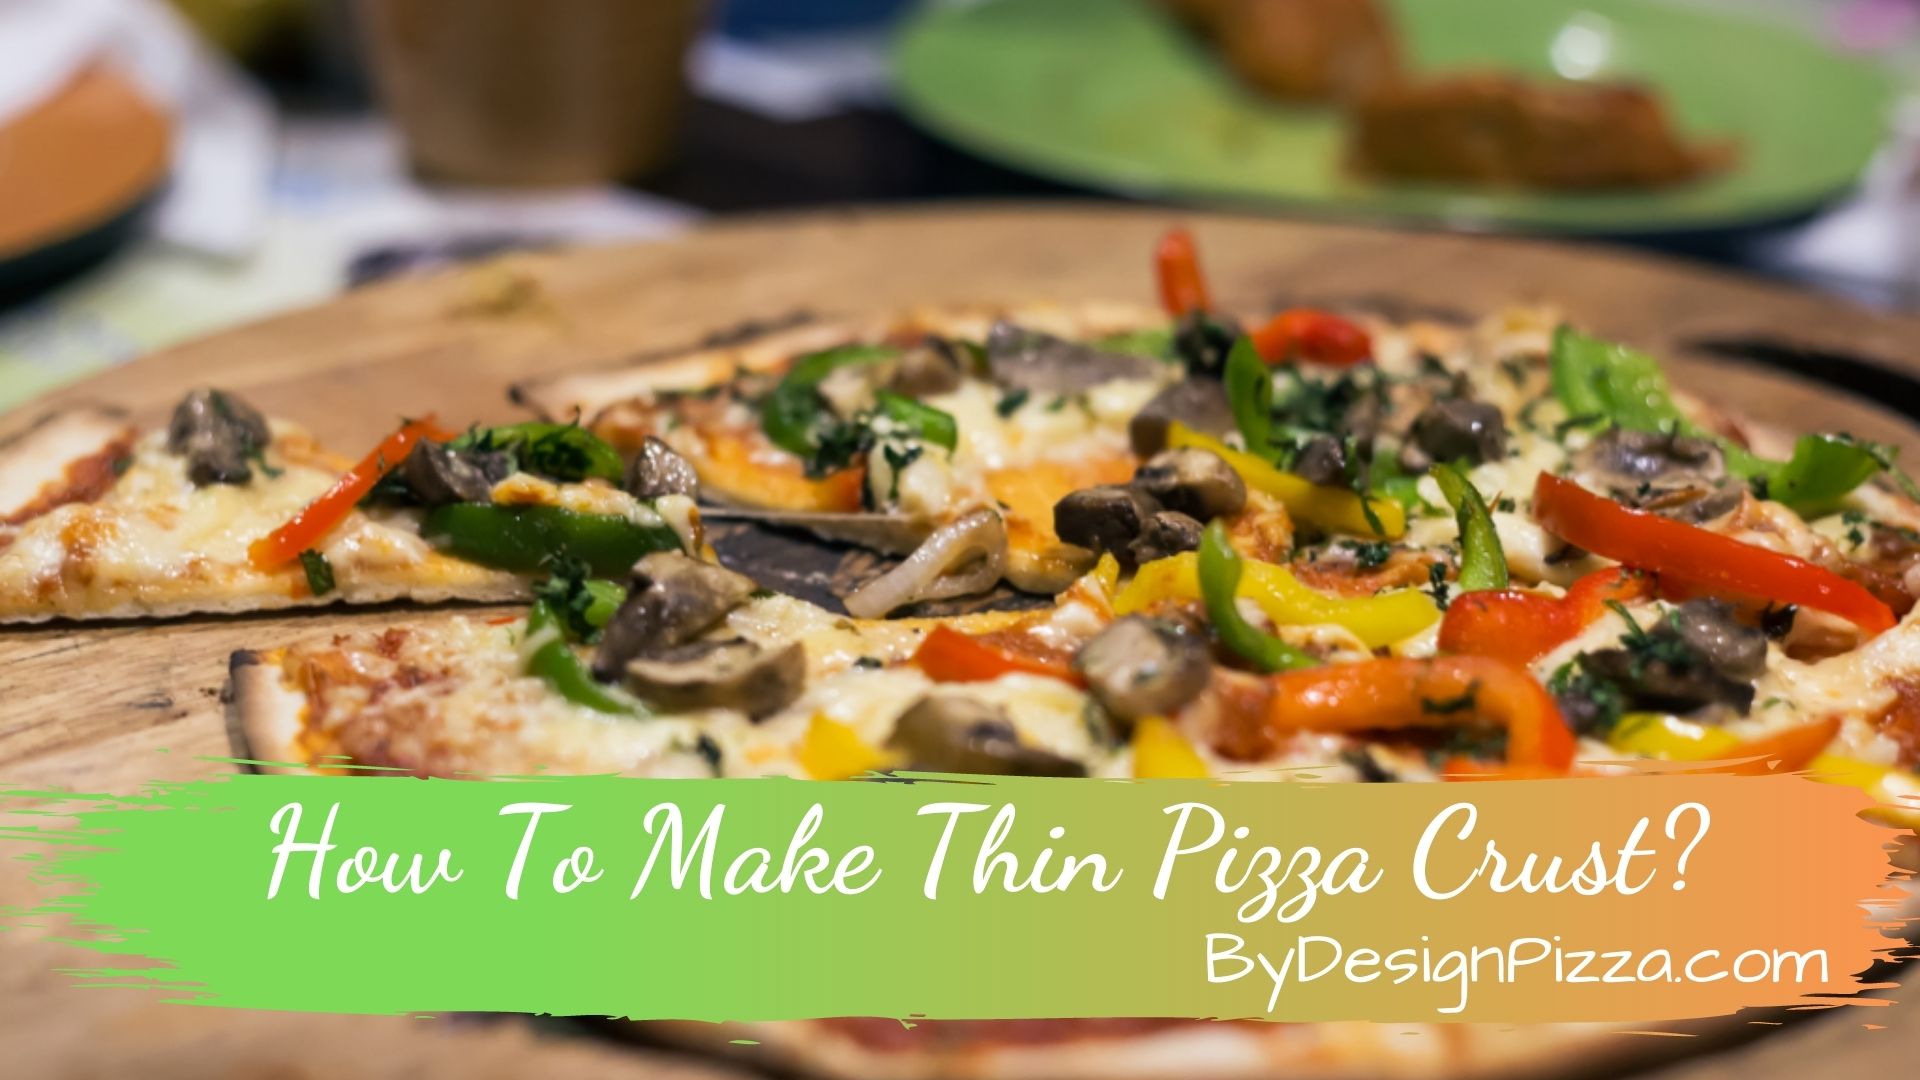 Making The Perfect Thin Crust Pizza